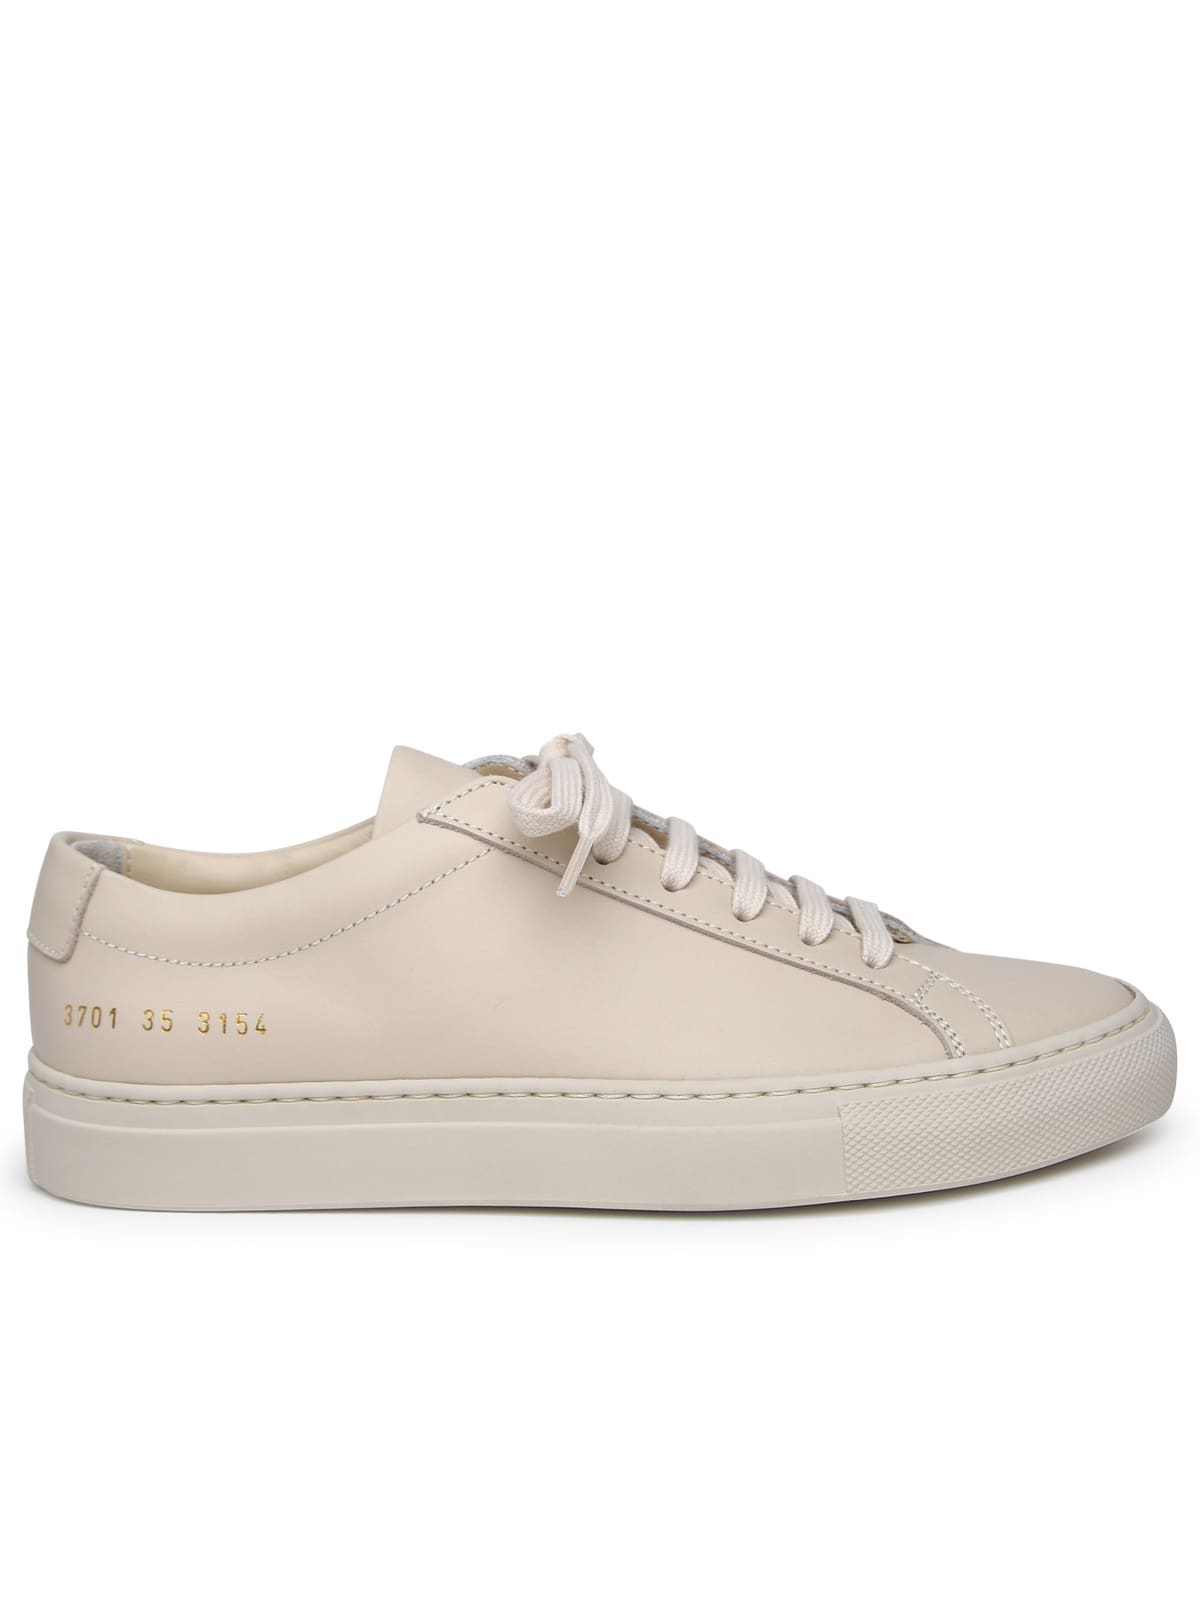 COMMON PROJECTS ACHILLES IVORY LEATHER SNEAKERS